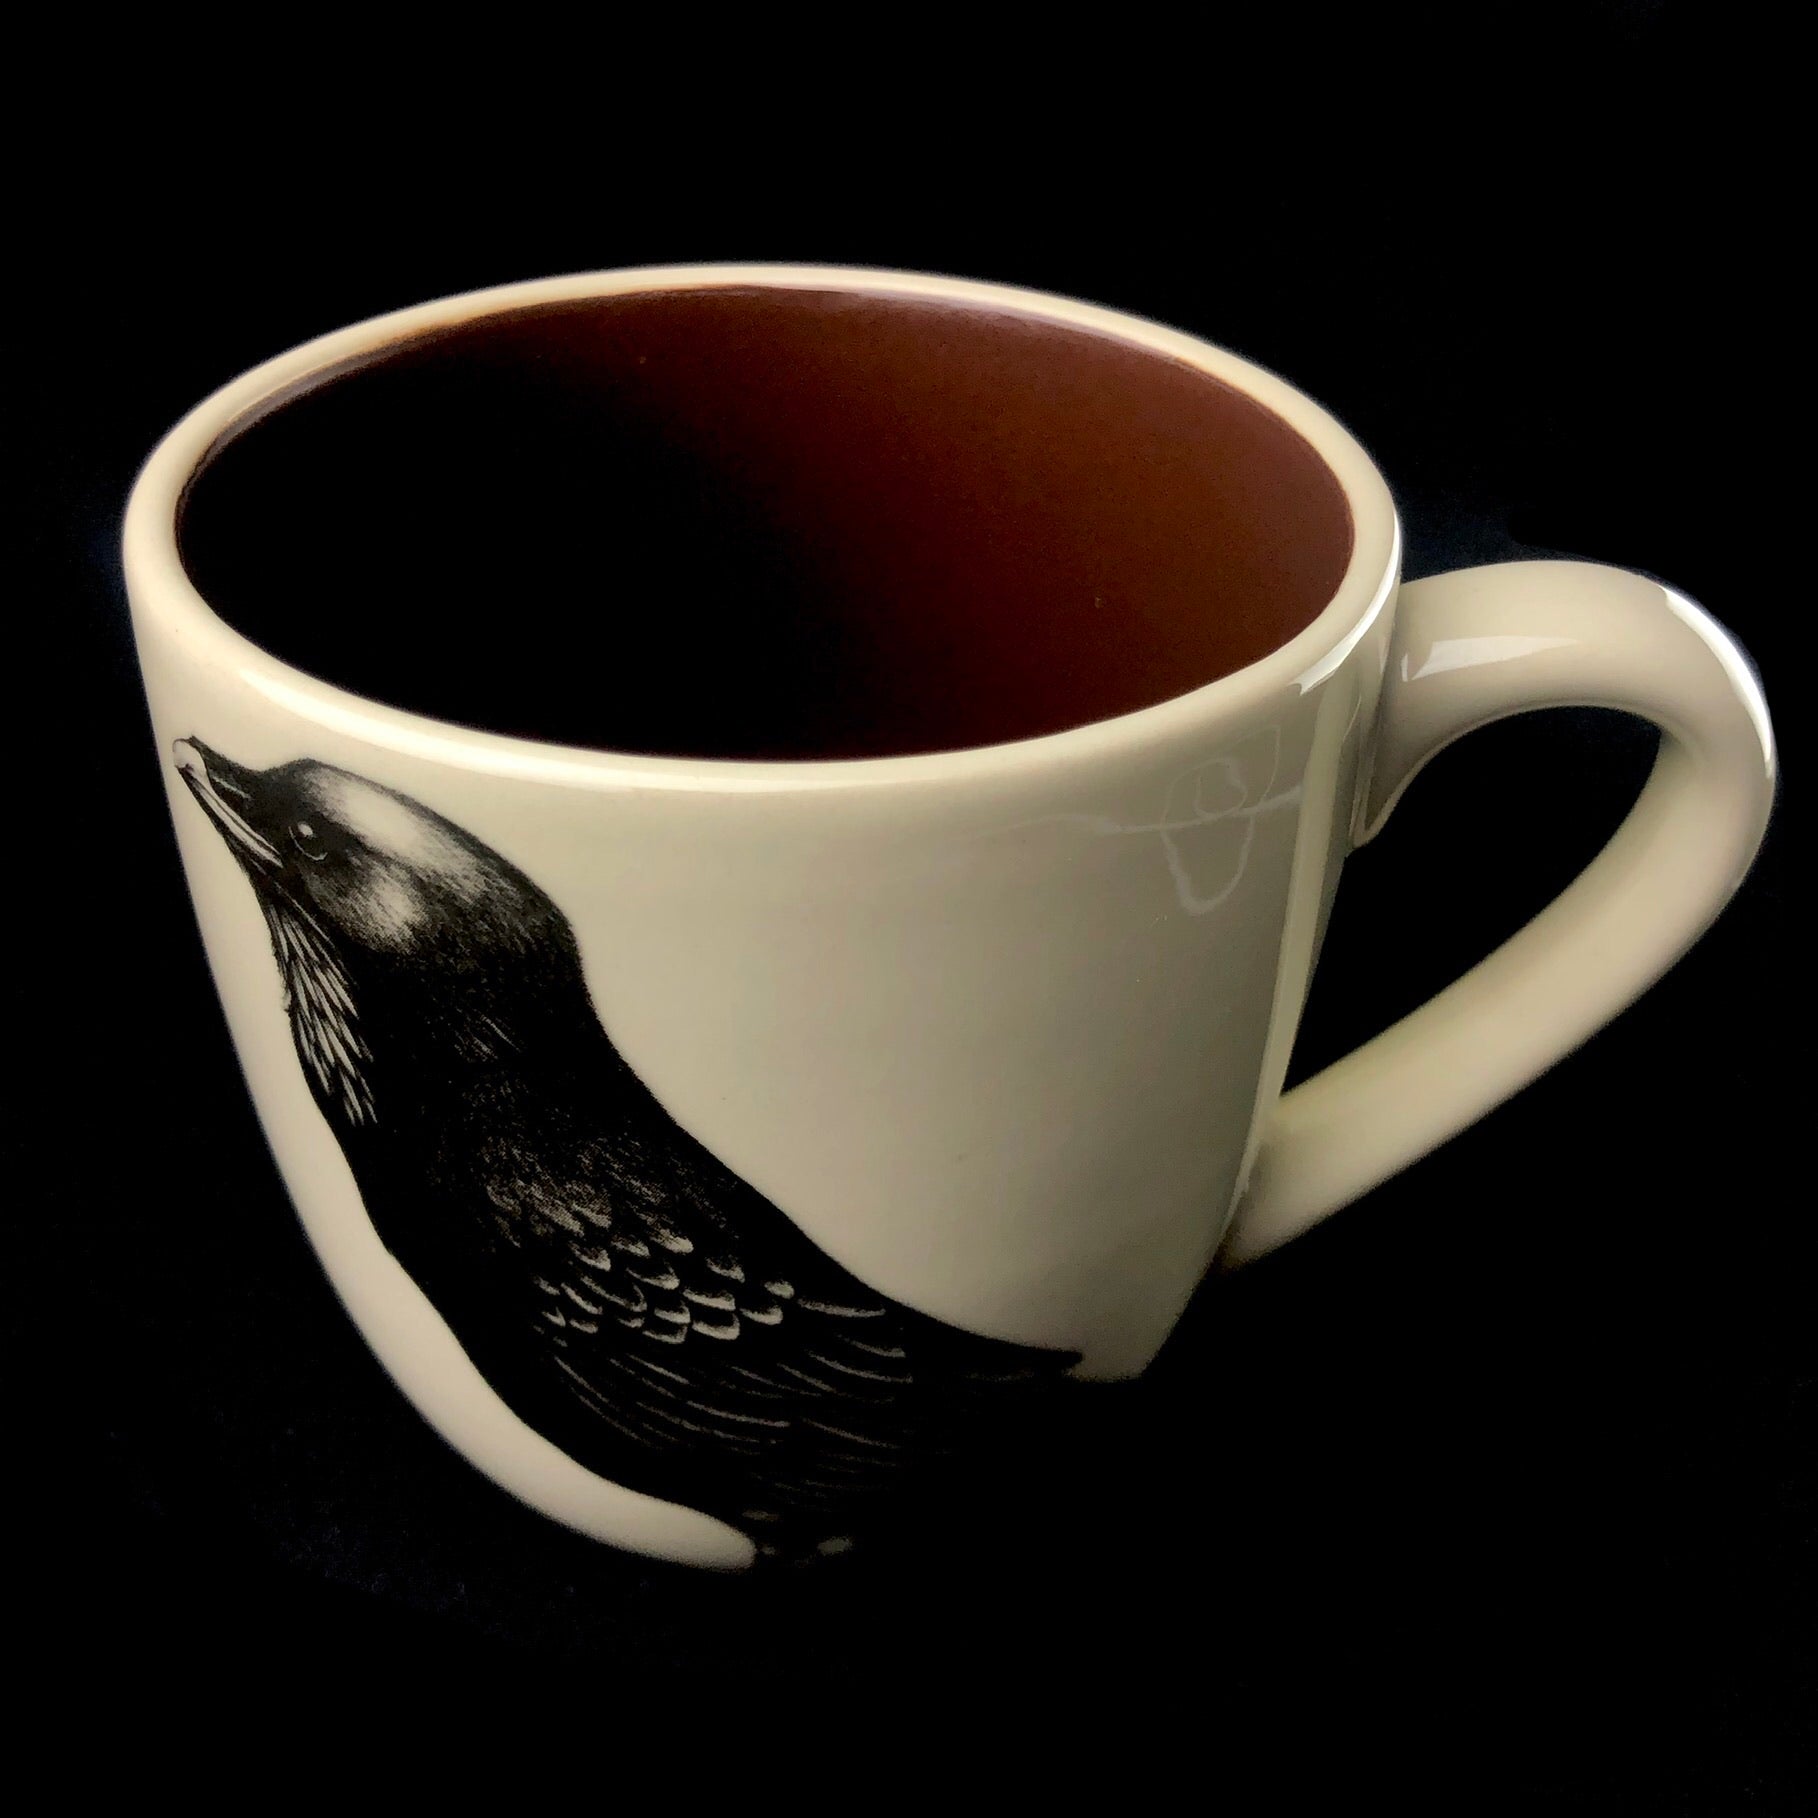 Top view of Raven Mug with brown interior